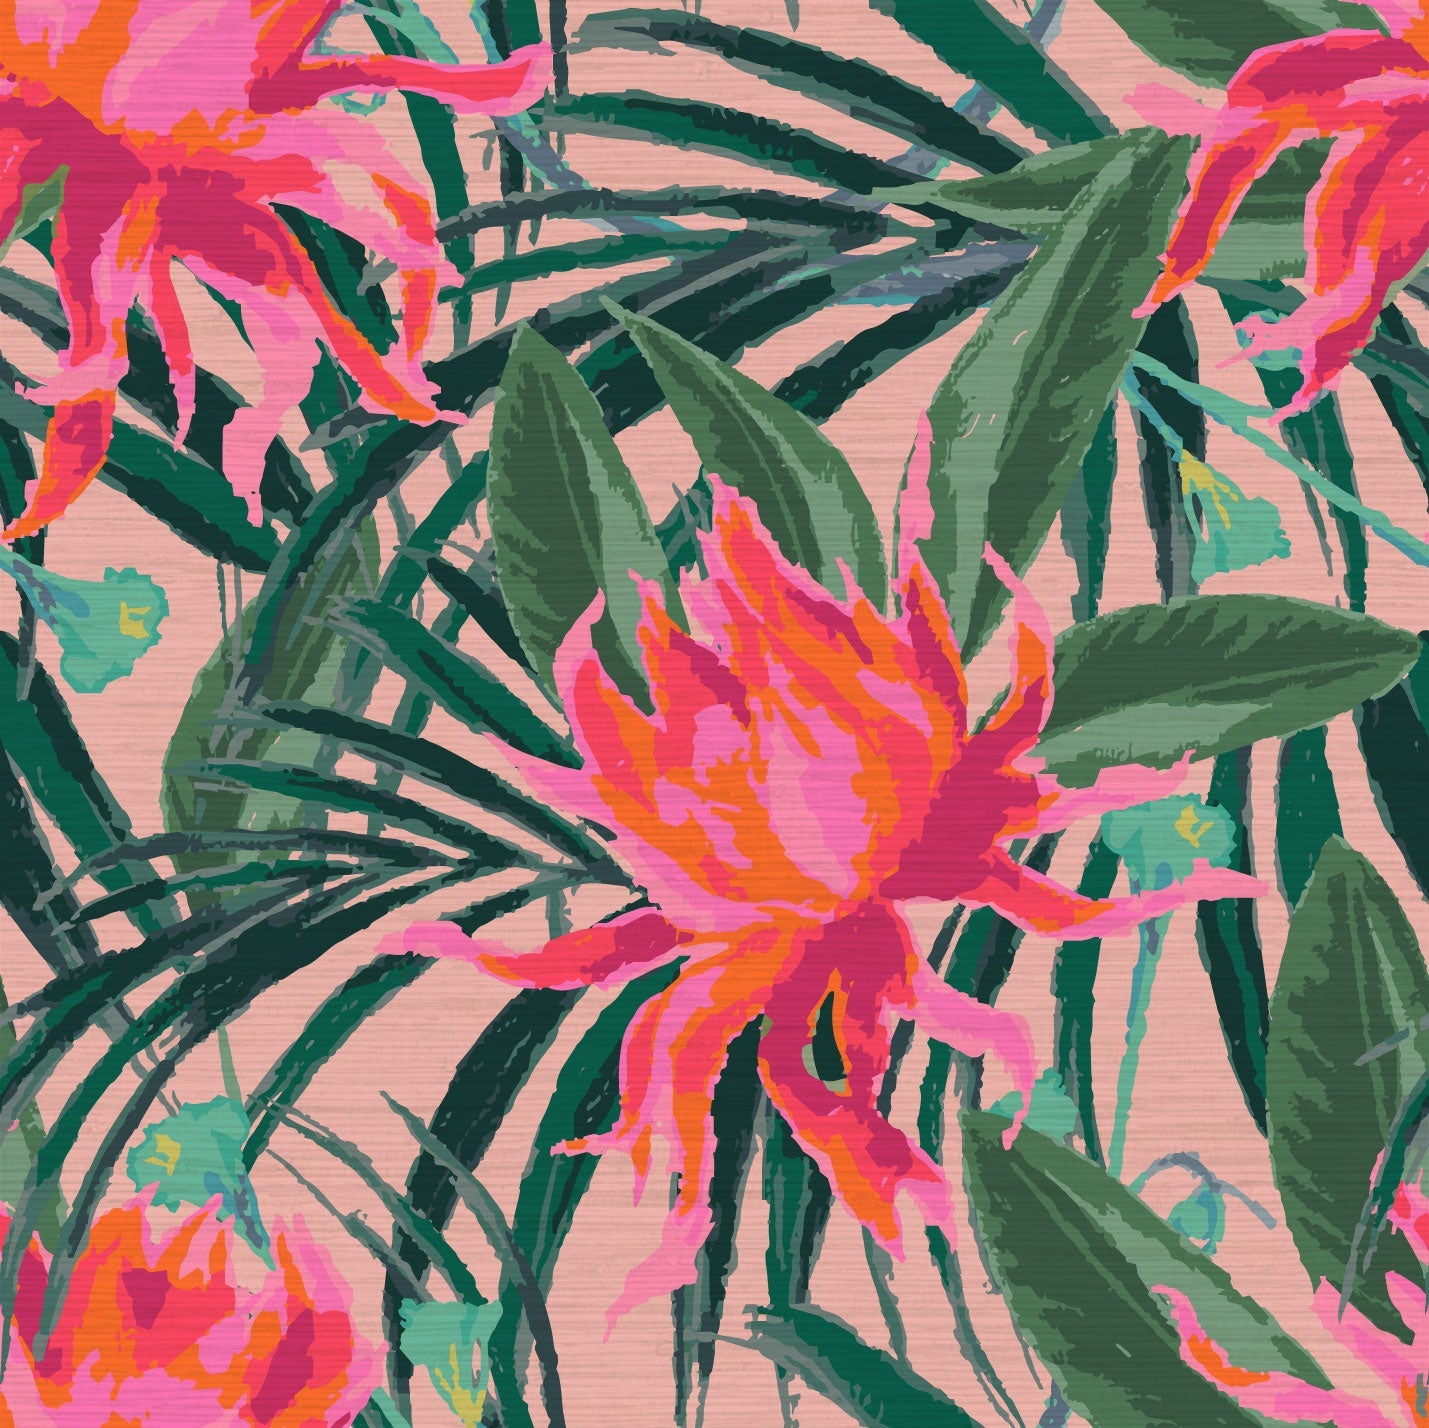 grasscloth wallpaper with light pink based featuring oversized painterly tropical flowers and palm leafs in striking shades of pink and leafs in shades of deep green